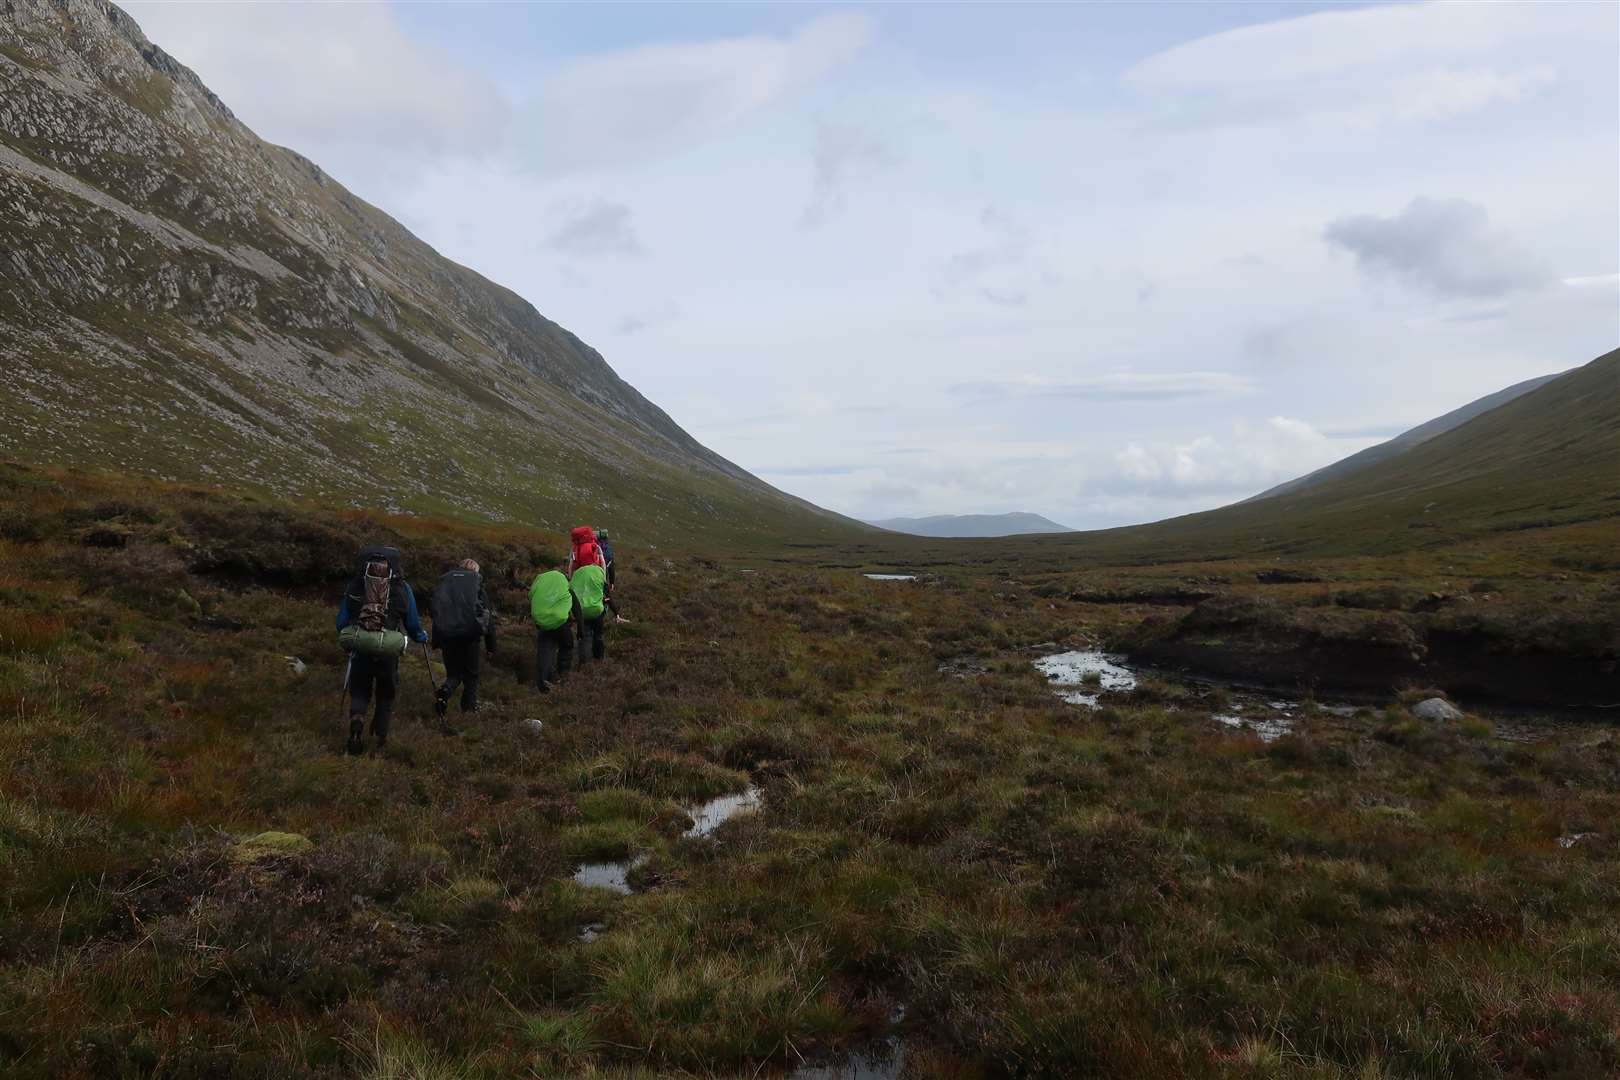 The groups found it hard work crossing the peat hags.